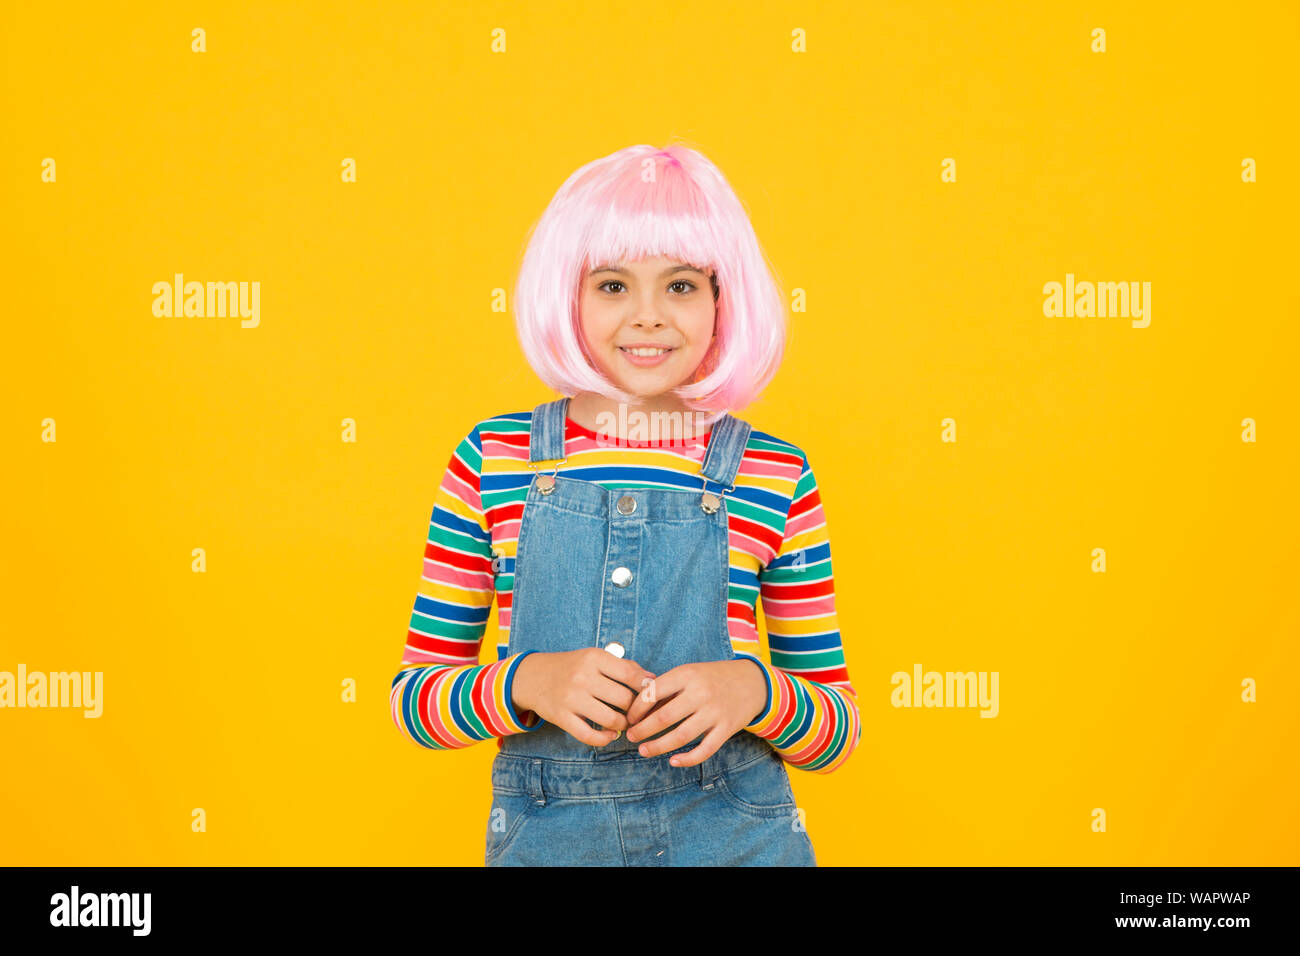 Otaku girl in wig smiling on yellow background. Cosplay character concept. Culture hobby and entertainment. Happy childhood. Anime fan. Cosplay kids party. Child cute cosplayer. Cosplay outfit. Stock Photo